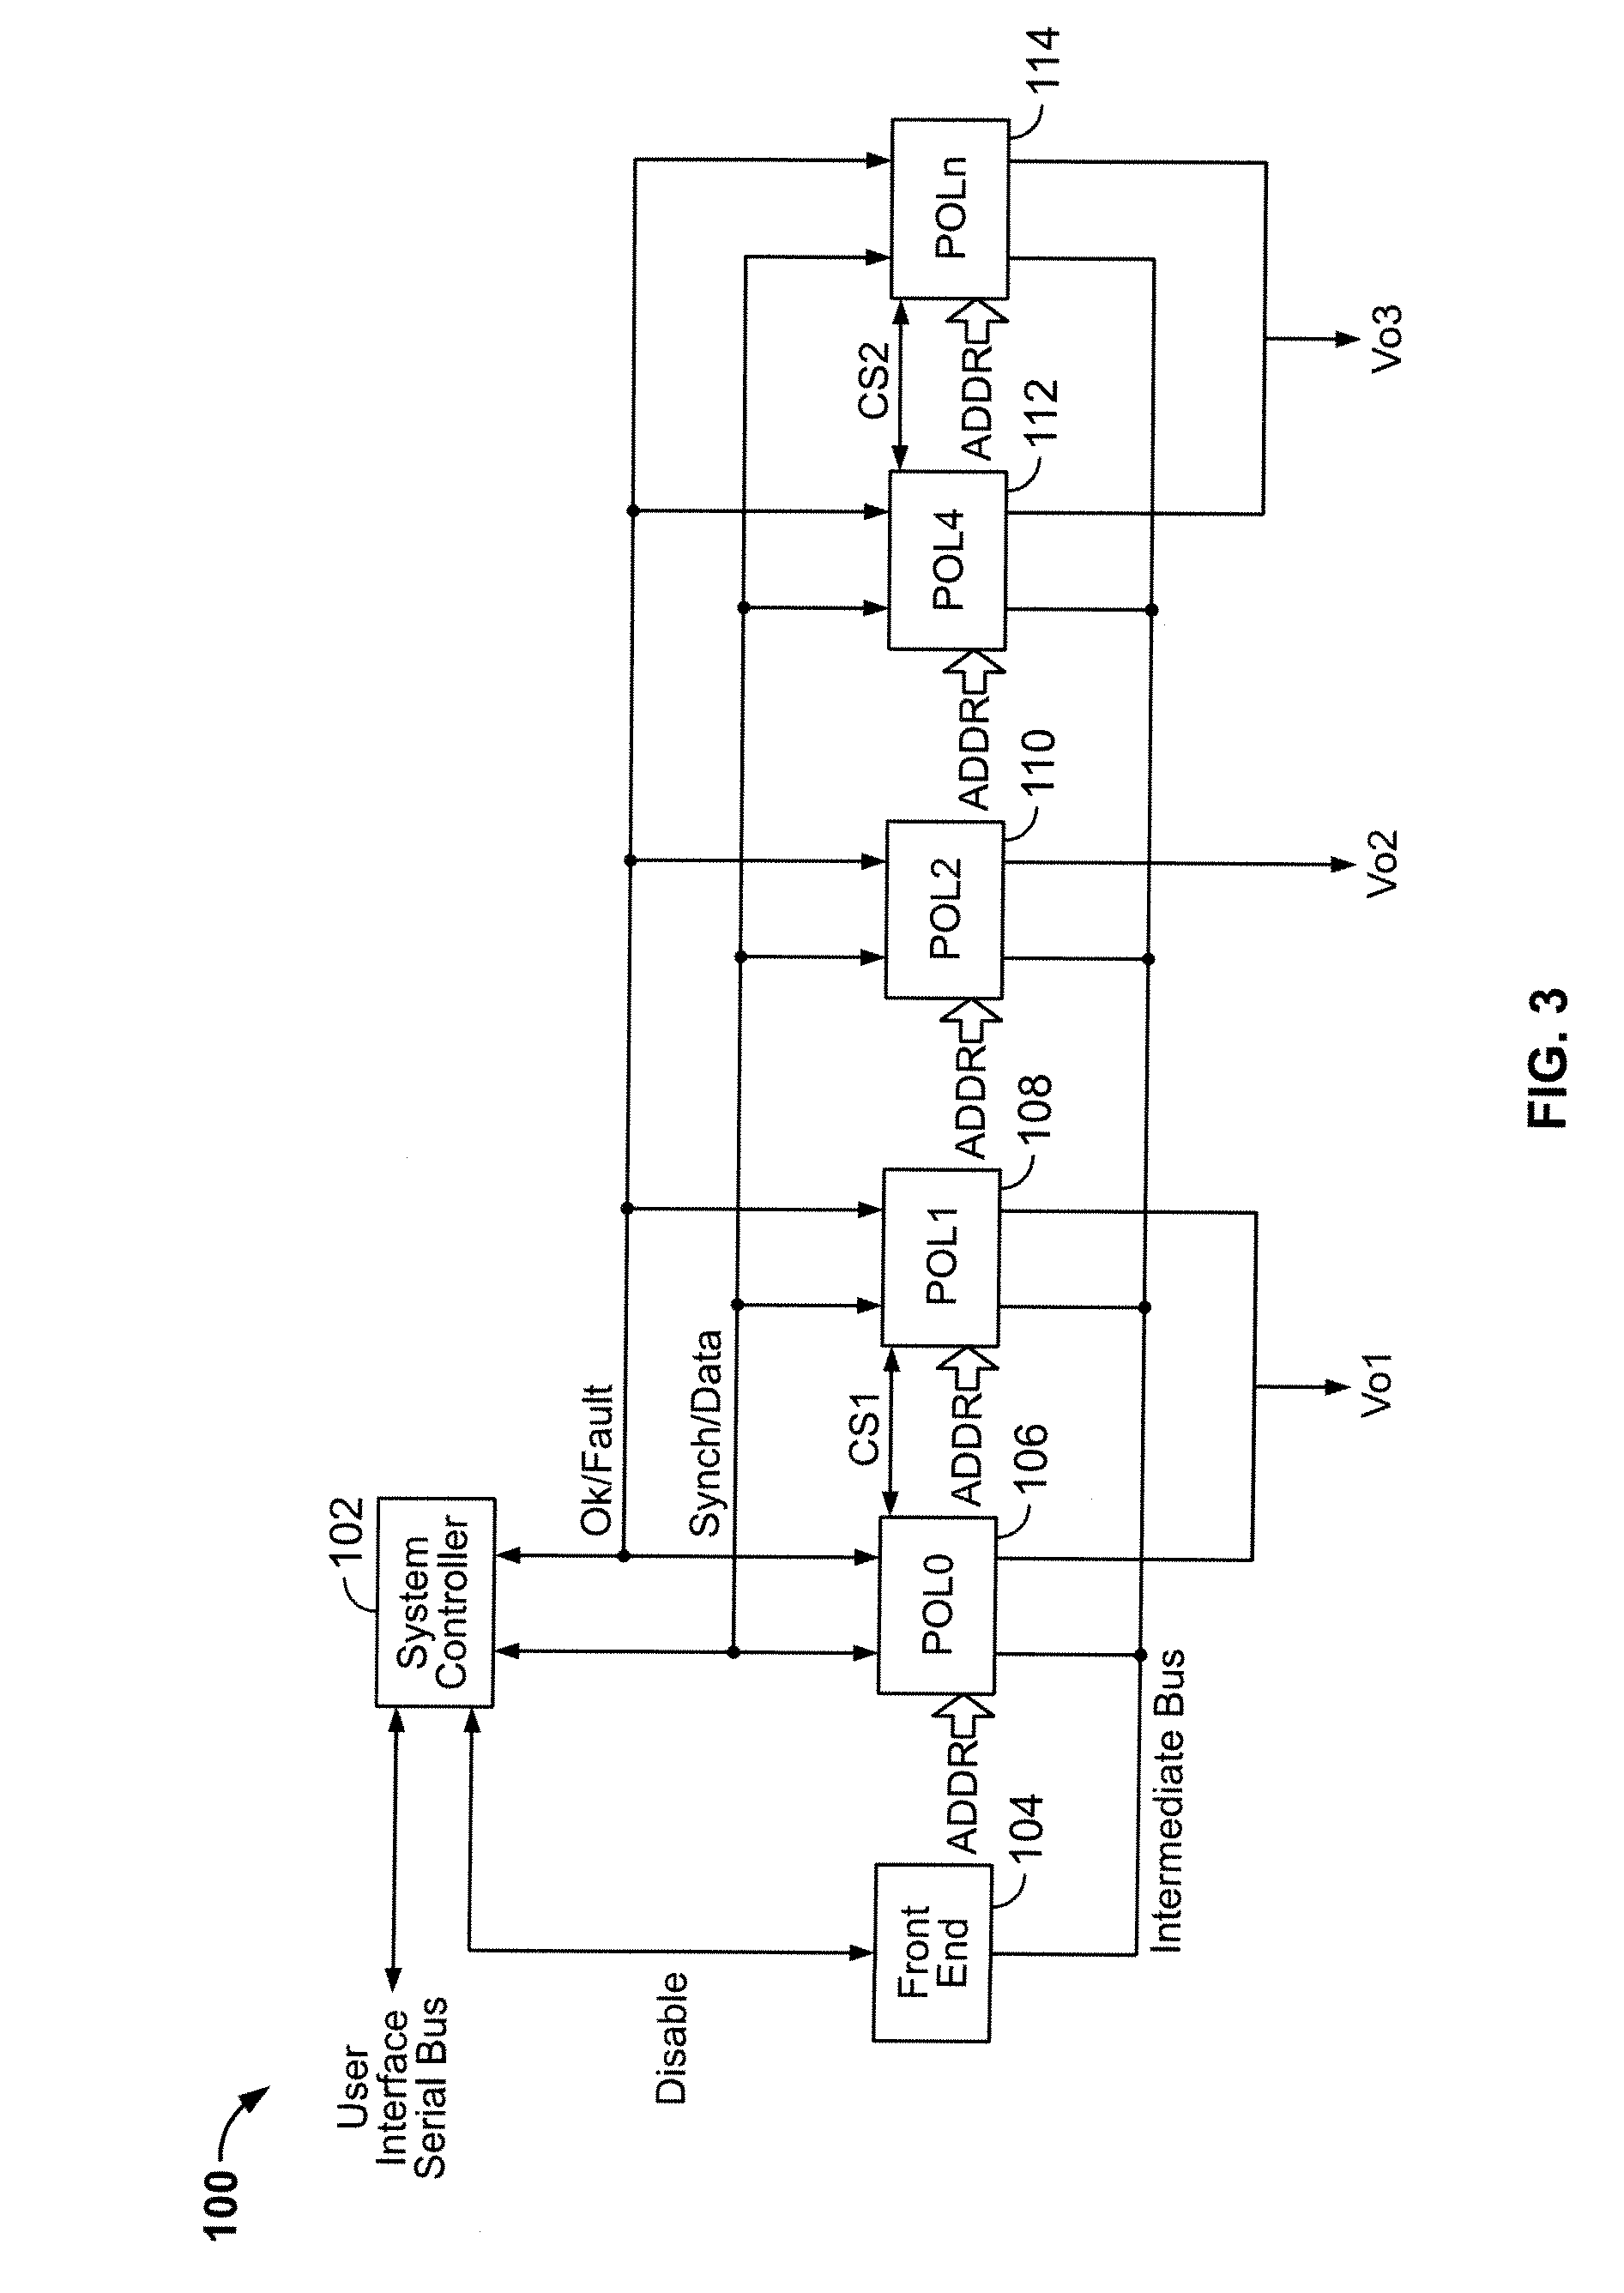 Method and system for controlling a mixed array of point-of-load regulators through a bus translator